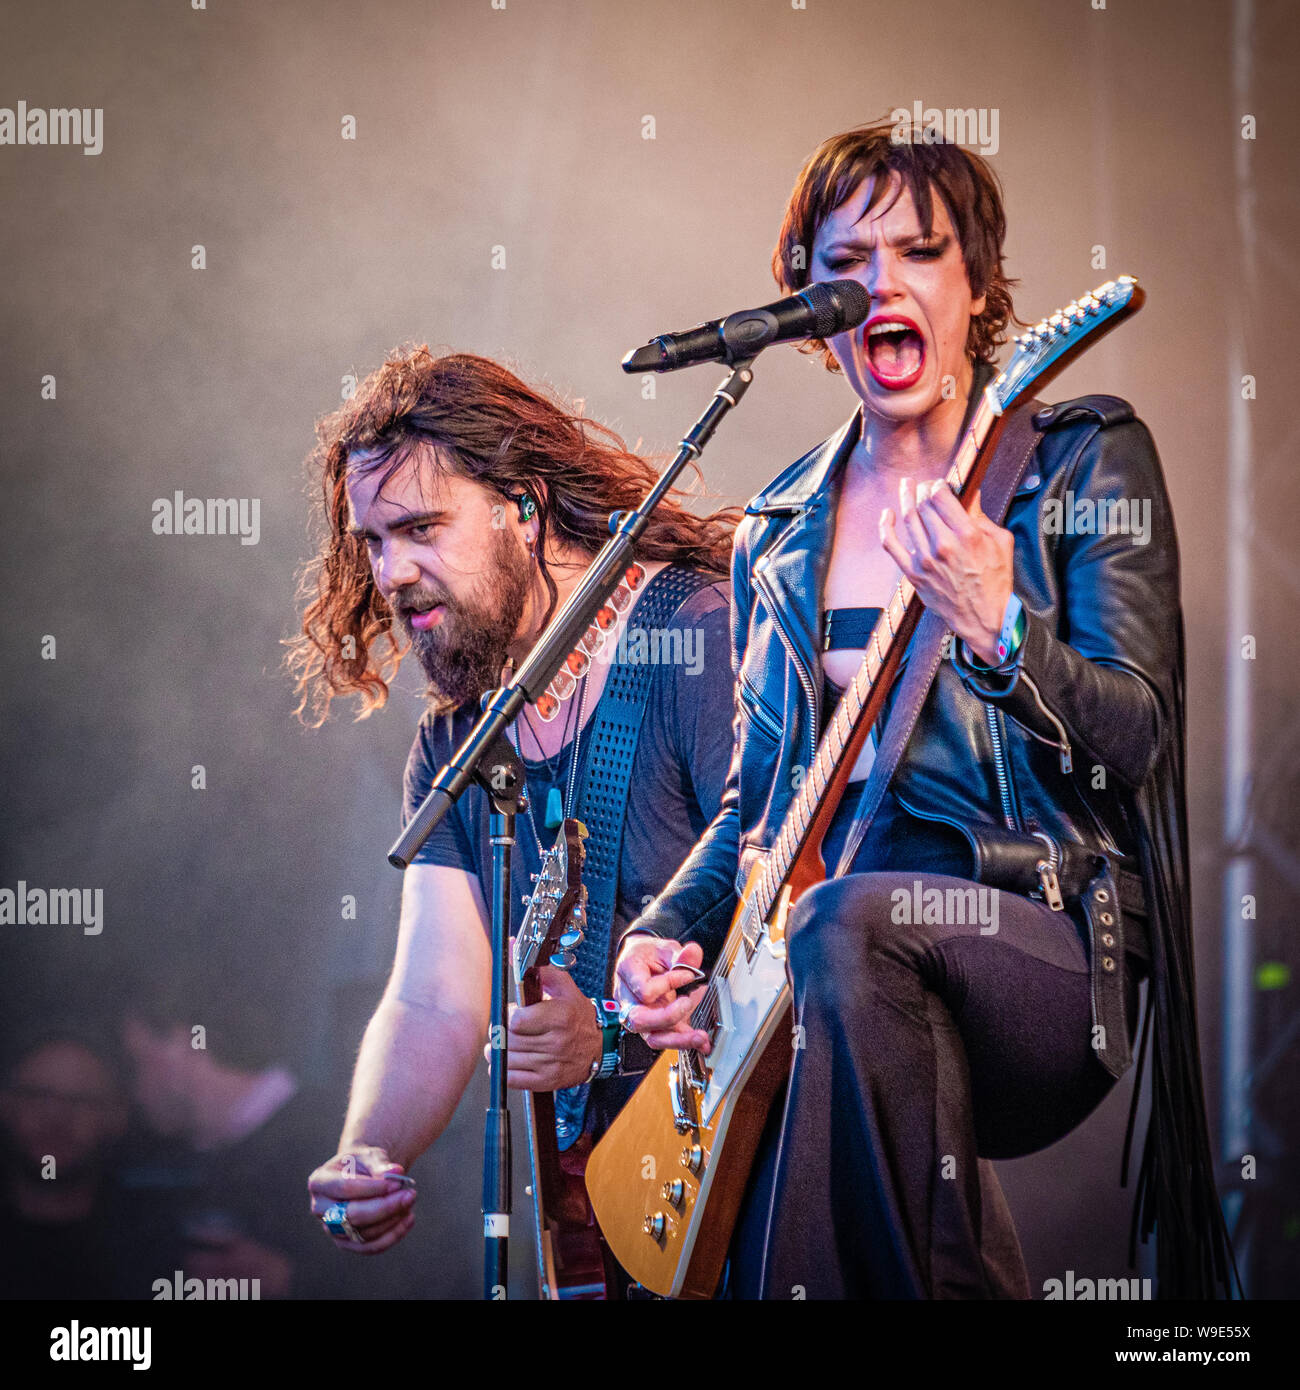 Halestorm performing on stage at the 2019 Copenhell Festival in Copenhagen. Here Lzzy Hale on vocals and guitar Stock Photo